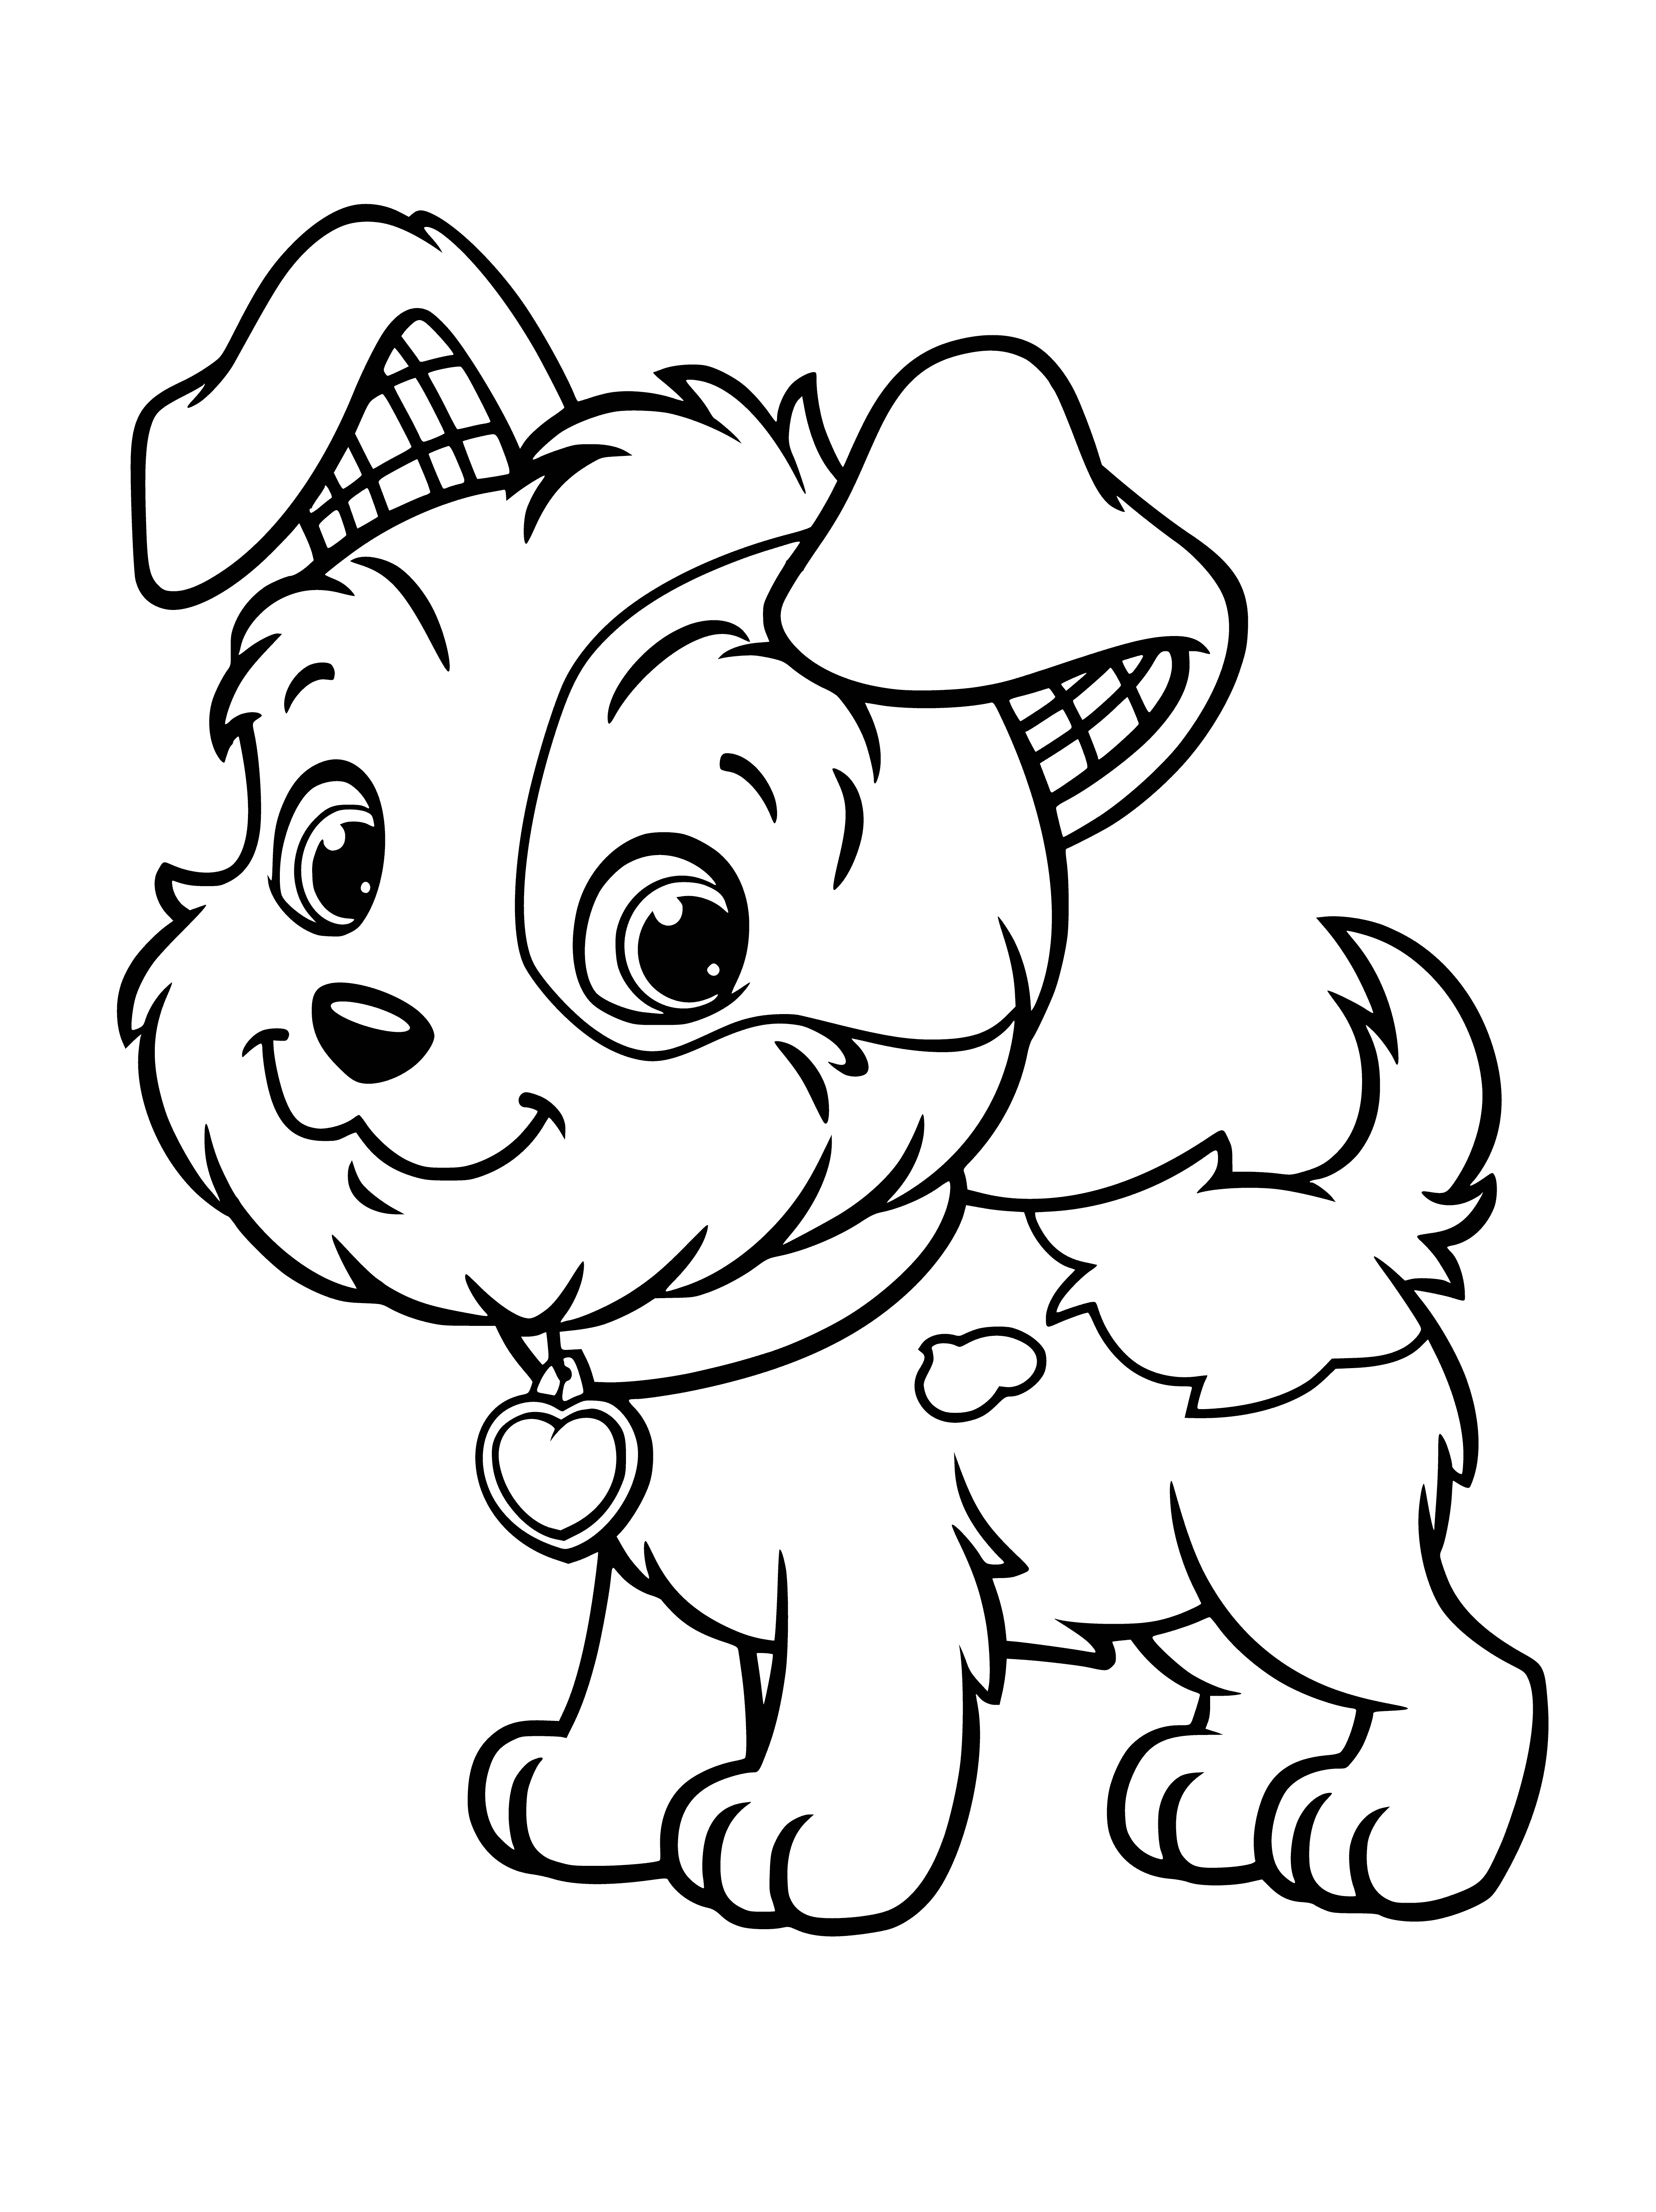 coloring page: Small white dog w/ black patches, long snout, small black eyes, black ears & curled tail standing on patch of grass.